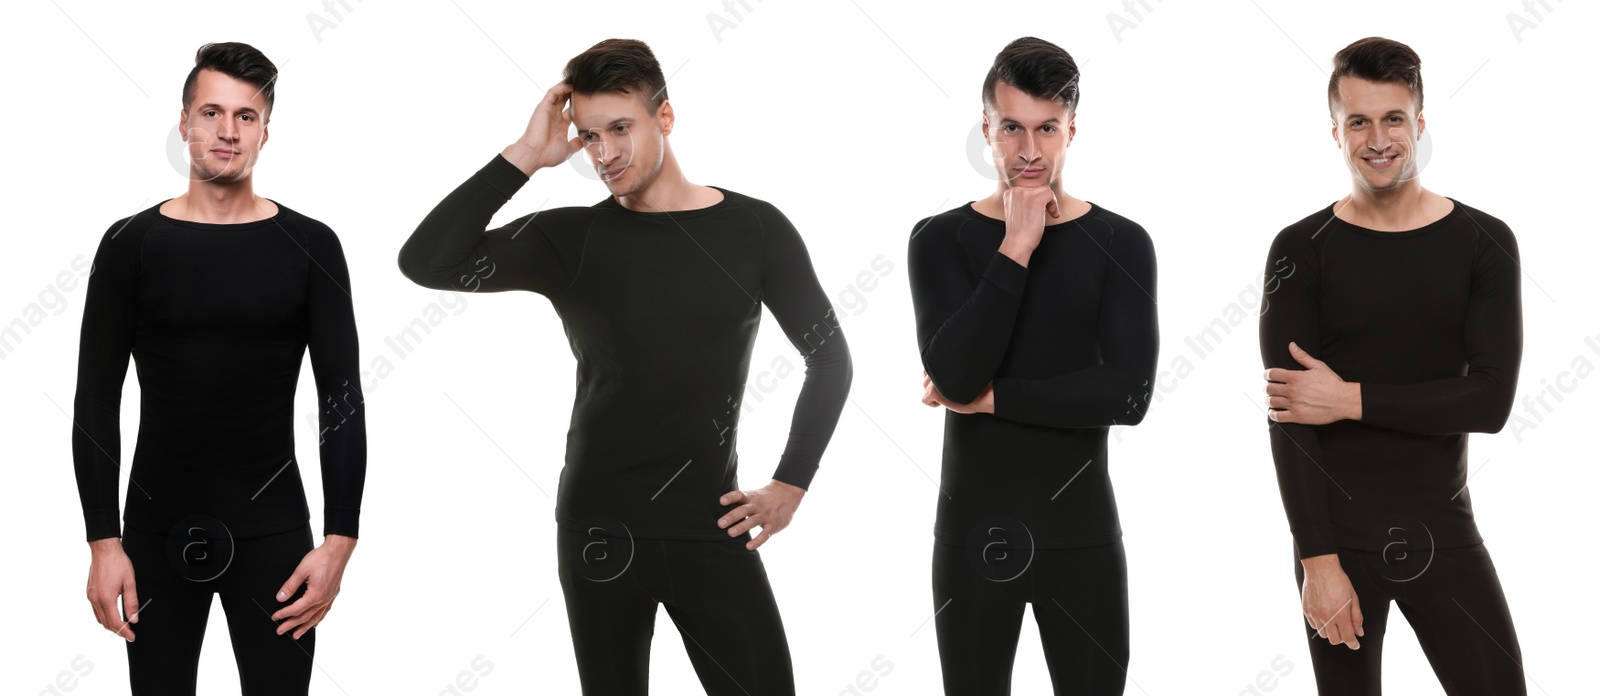 Image of Collage of man wearing thermal underwear isolated on white